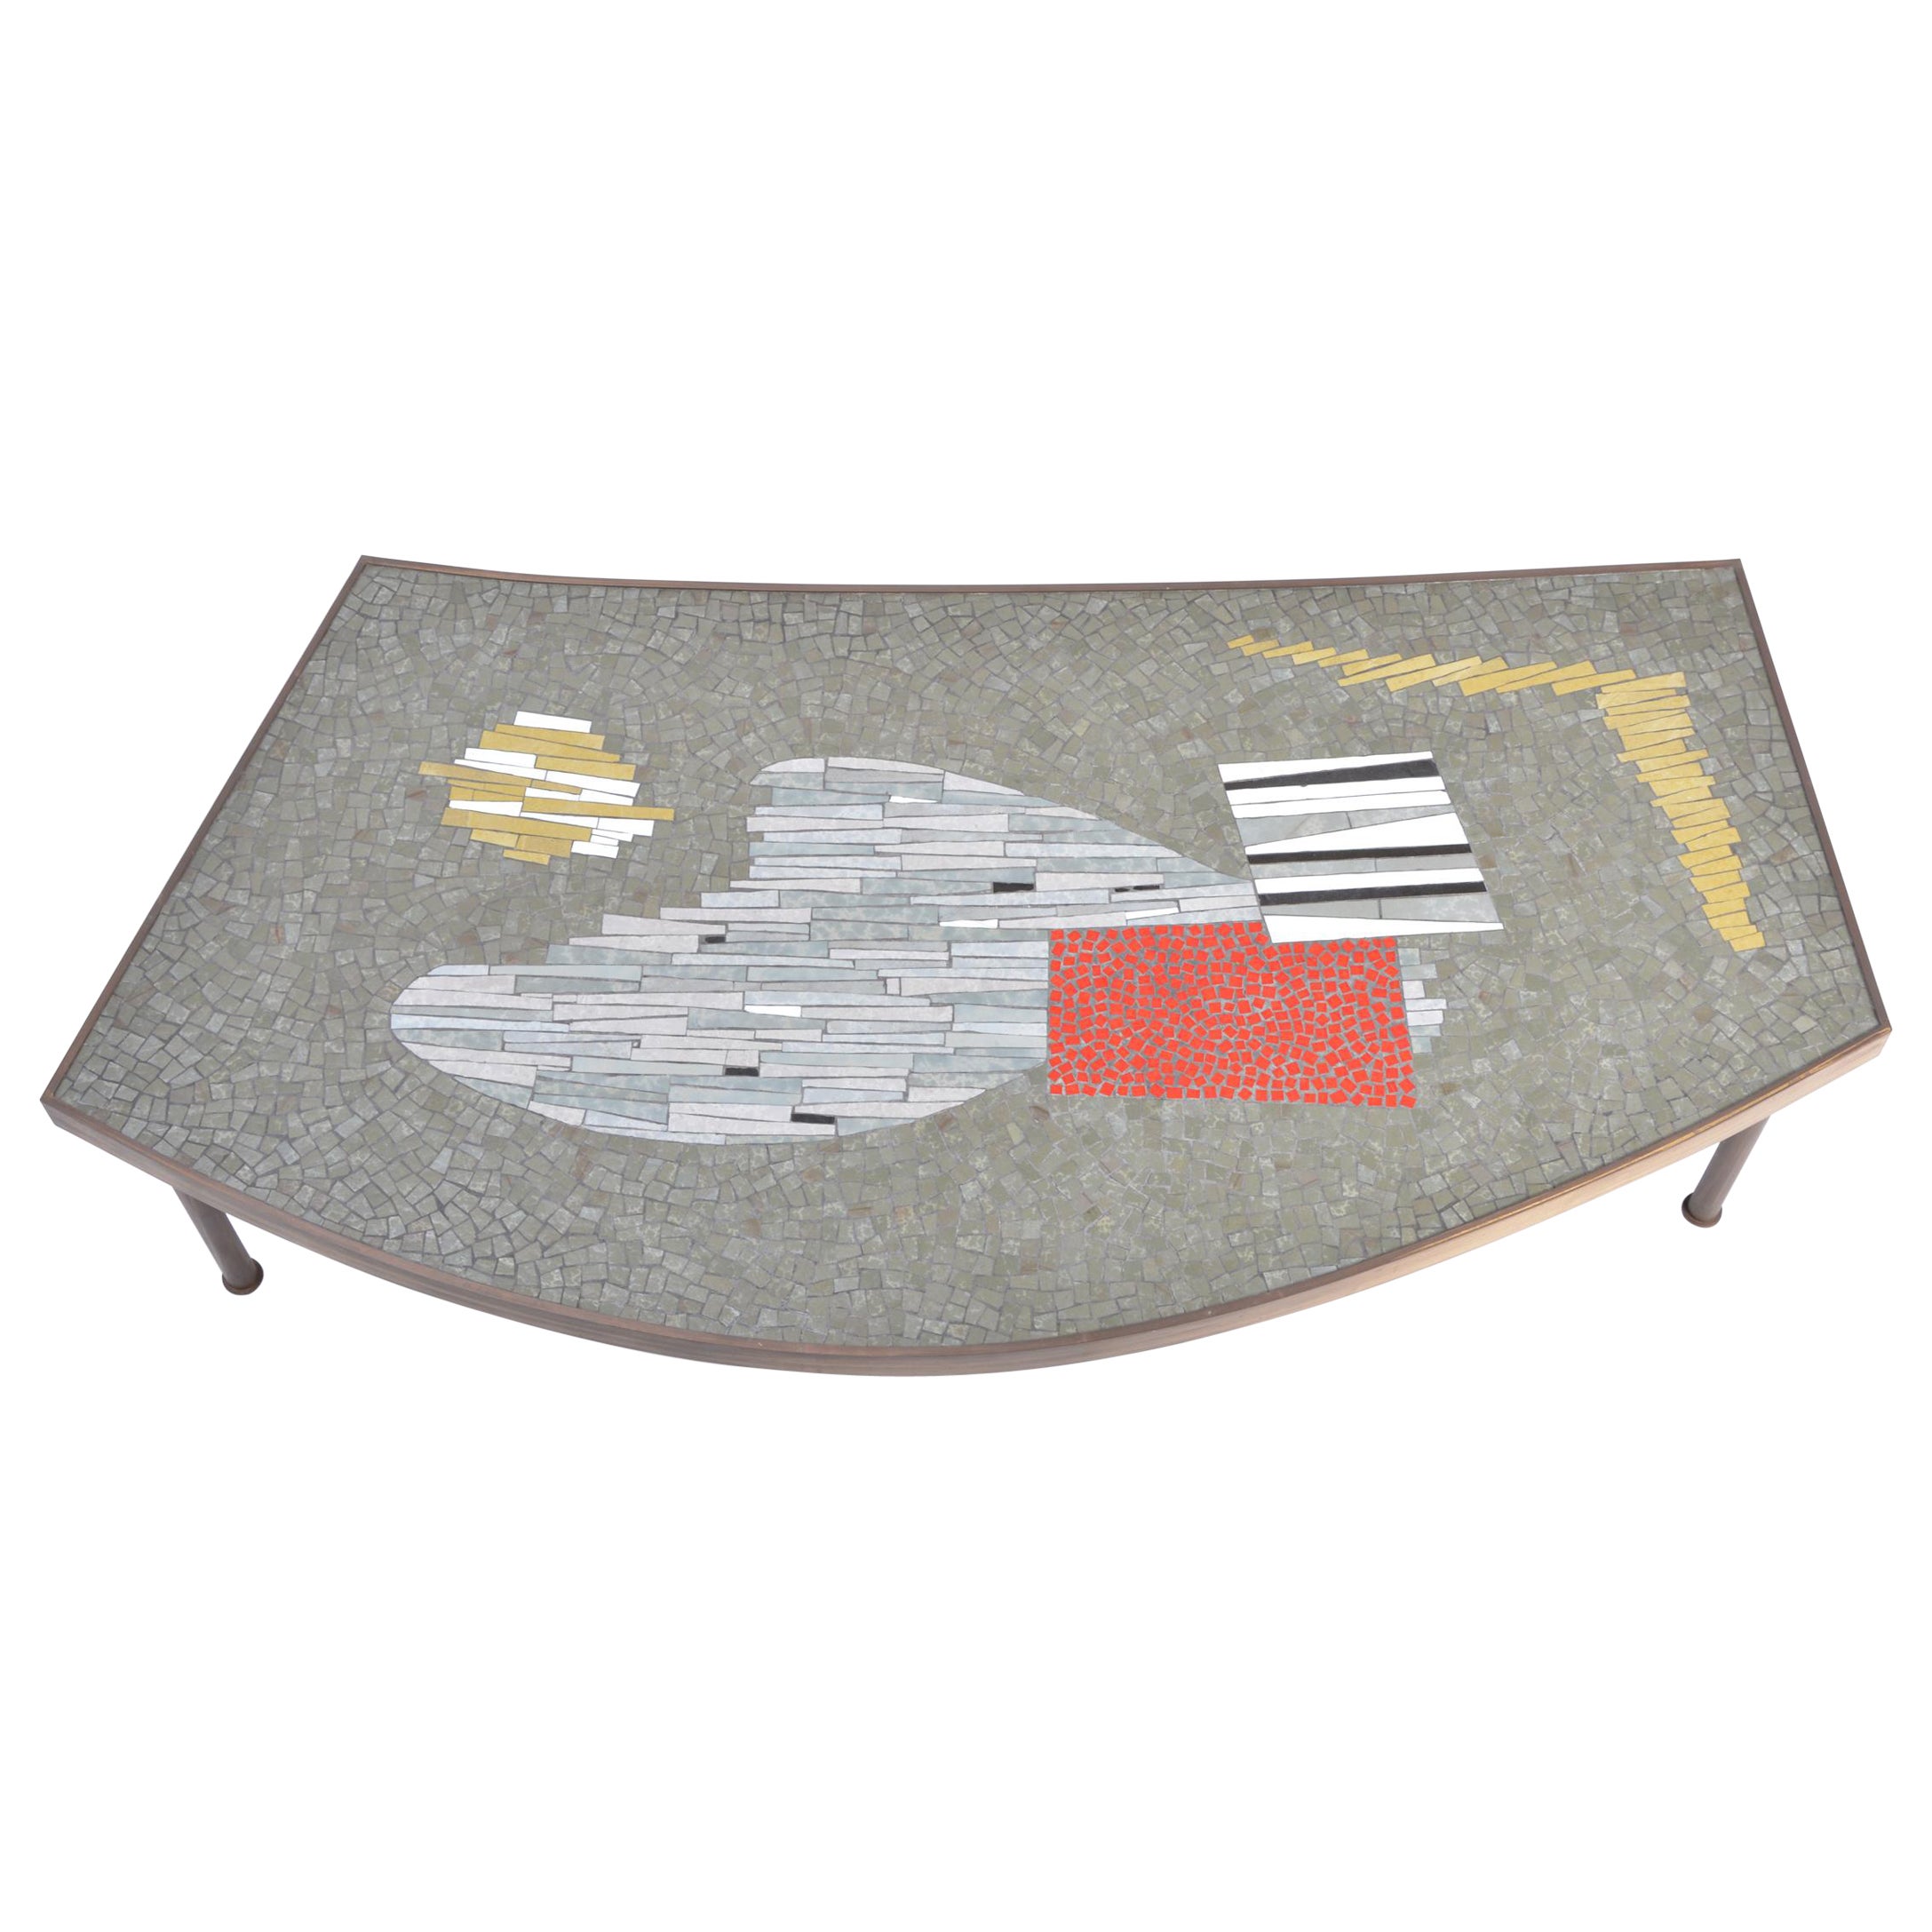 Large Midcentury Mosaic and Brass Coffee Table by Berthold Müller-Oerlinghausen For Sale